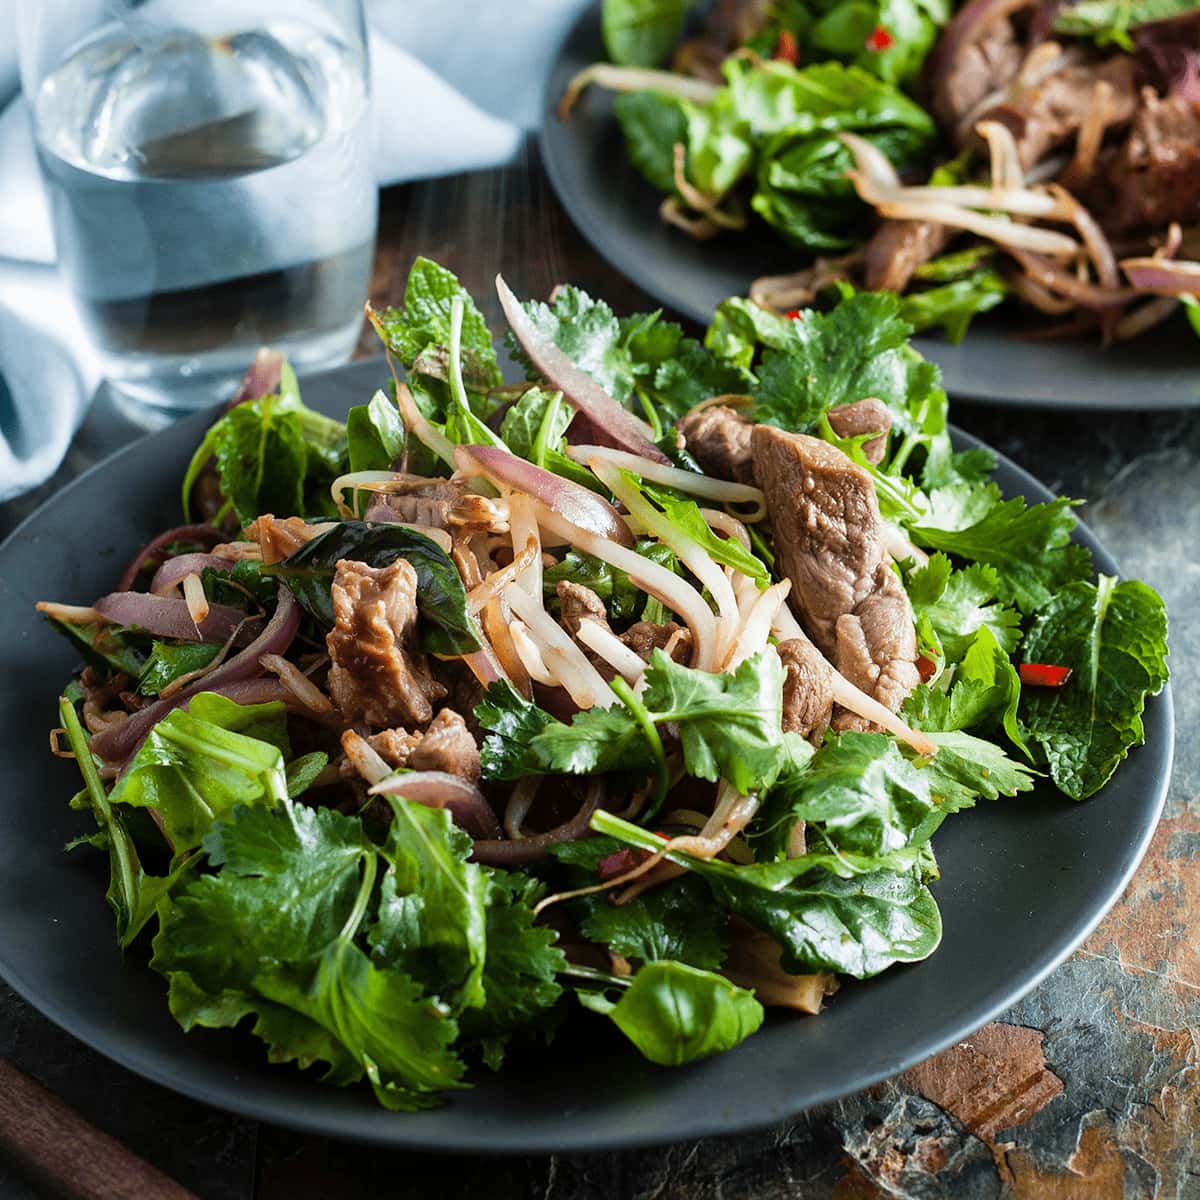 warm lamb salad with Thai dressing served with glass of water and napkin behind.